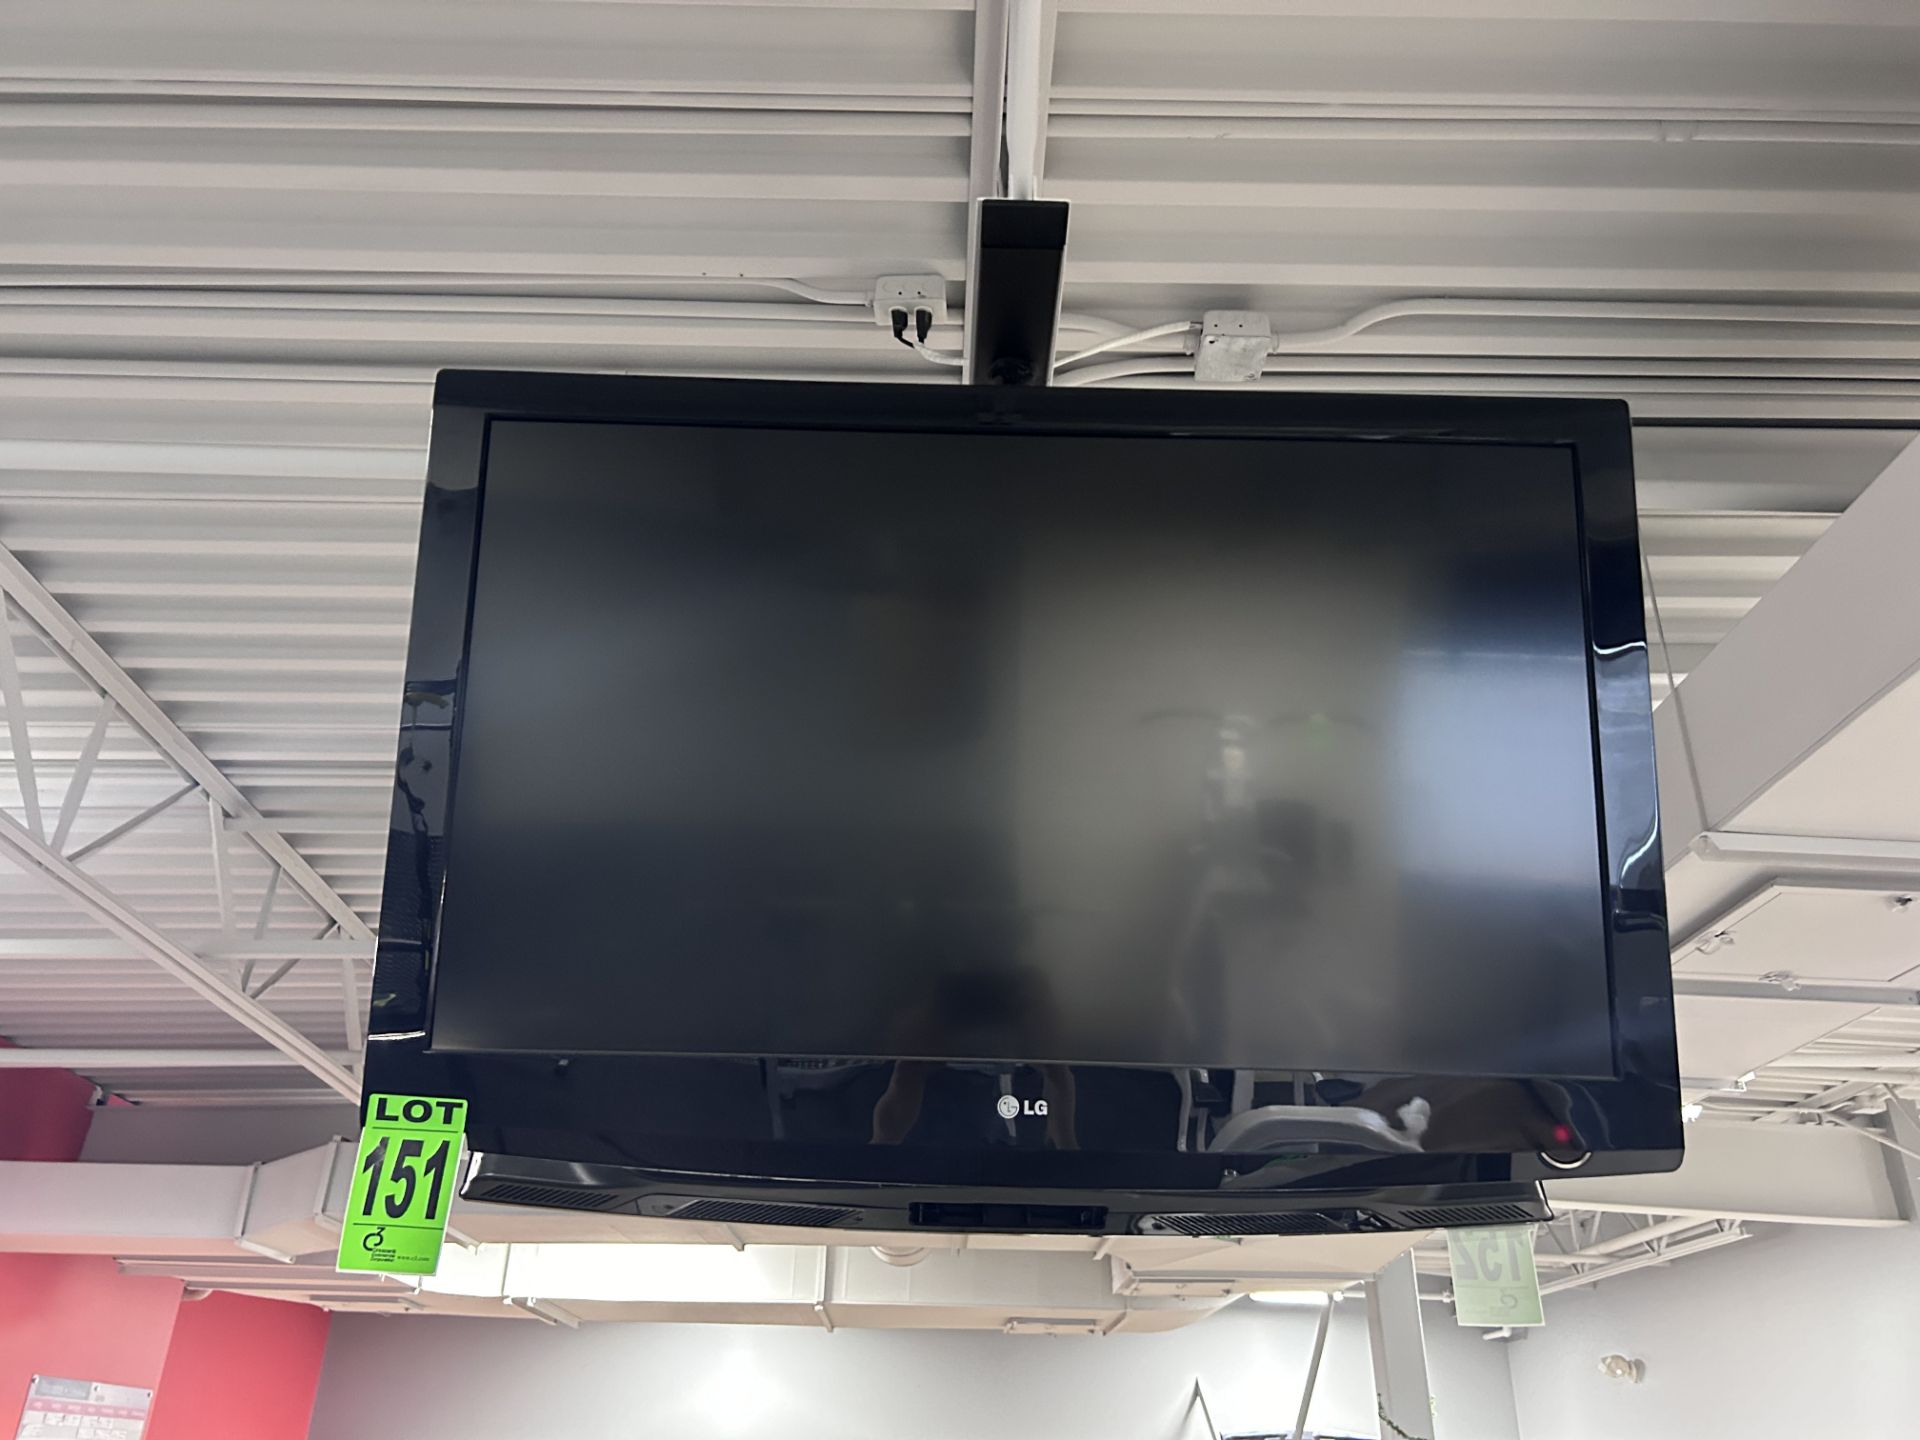 42" LG Ceiling-Mount Flatscreen Television, with Bracket